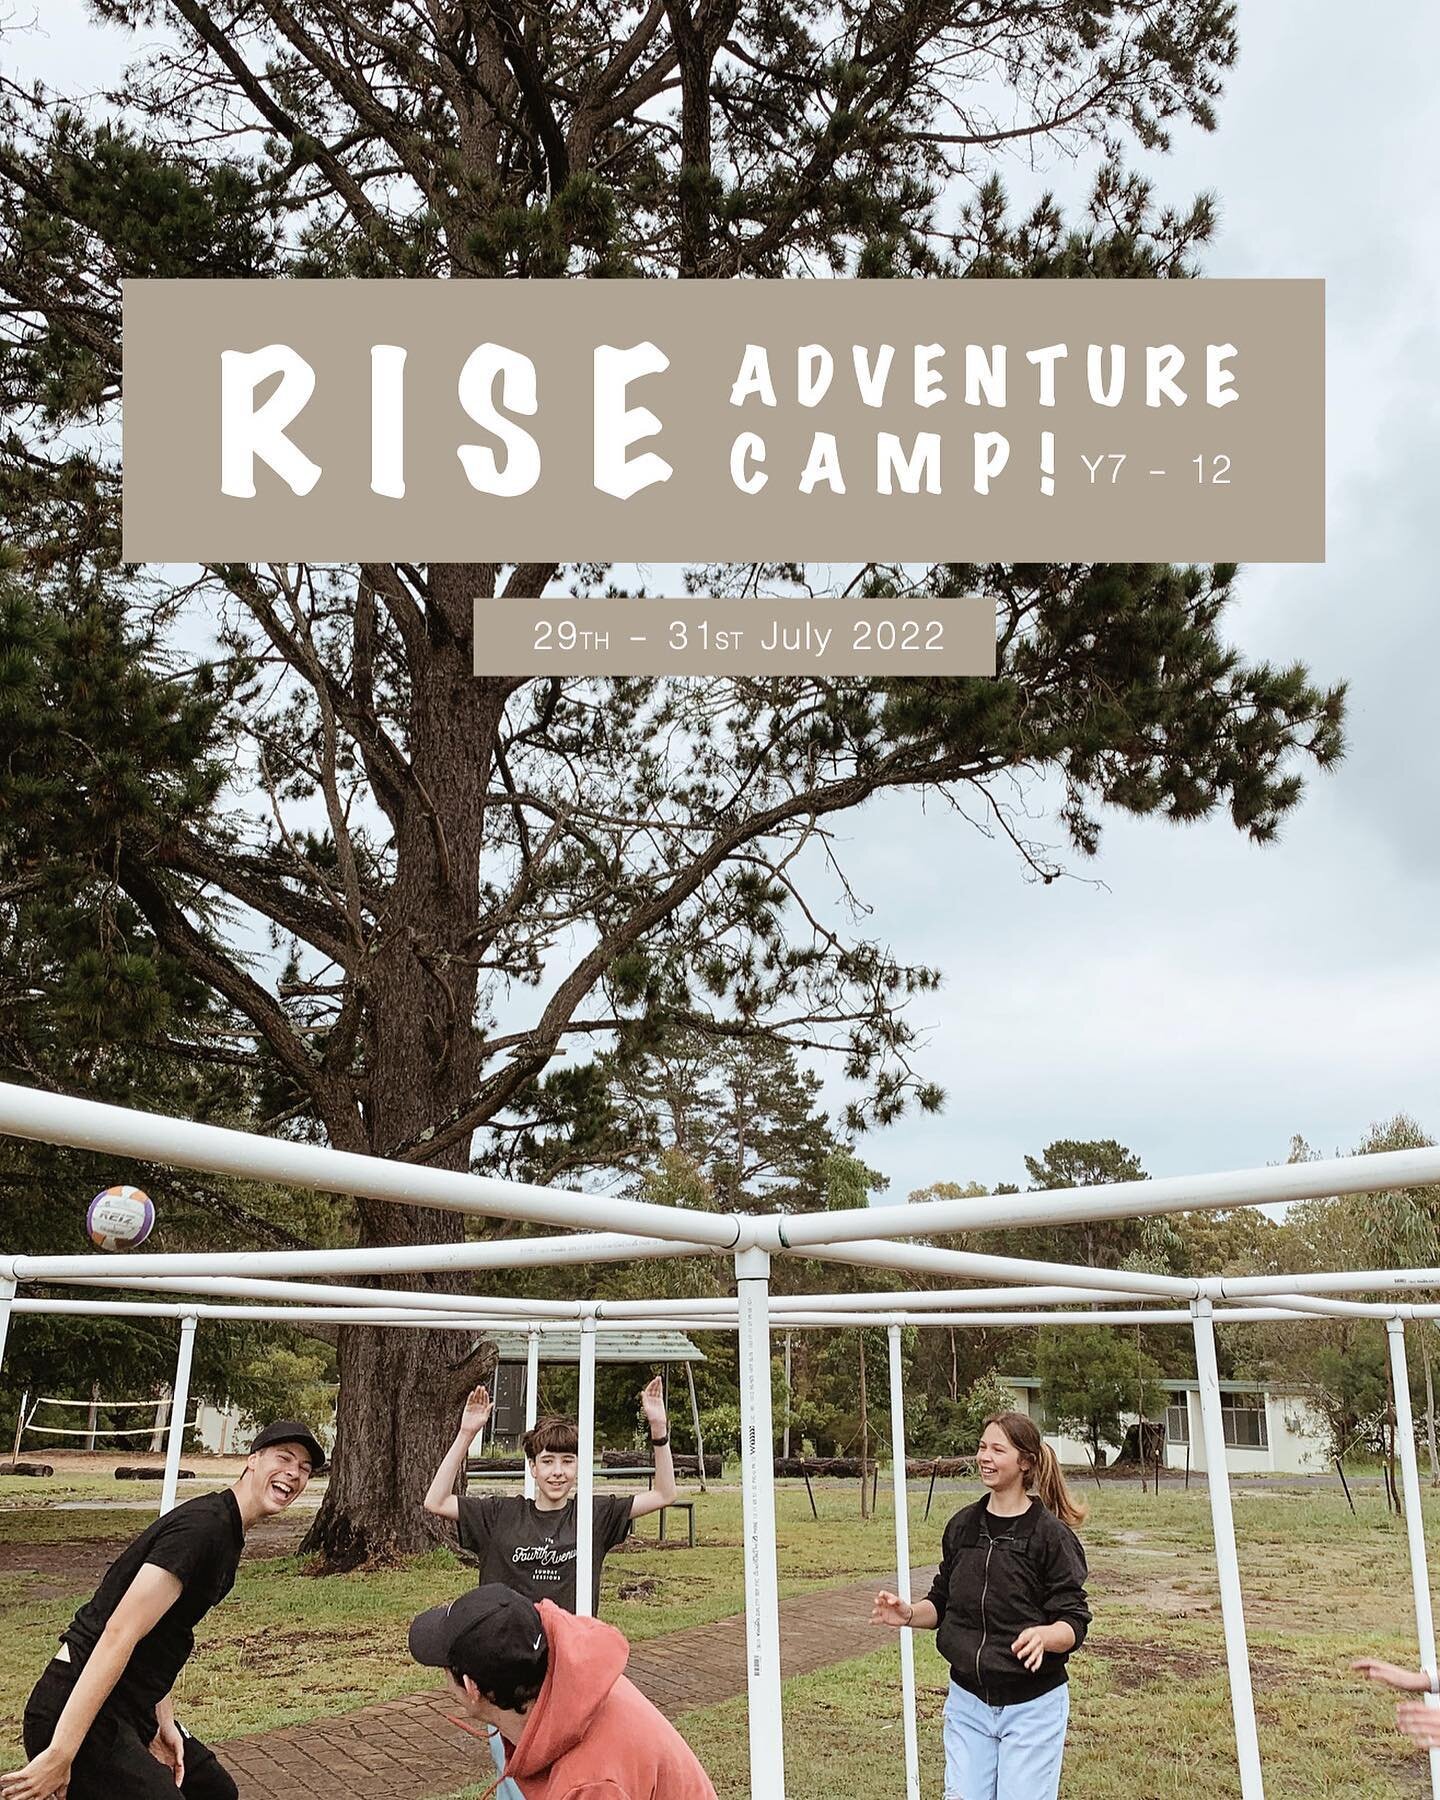 1 WEEK TILL RISE ADVENTURE CAMP! 
We&rsquo;re pumped to play hours of 9 square, learn new skills with our outdoor activities &amp; talk about God 😋🌿✨

Check out our website or contact us for more information.

📧 office@wedderburn.org.au
📞 4634126